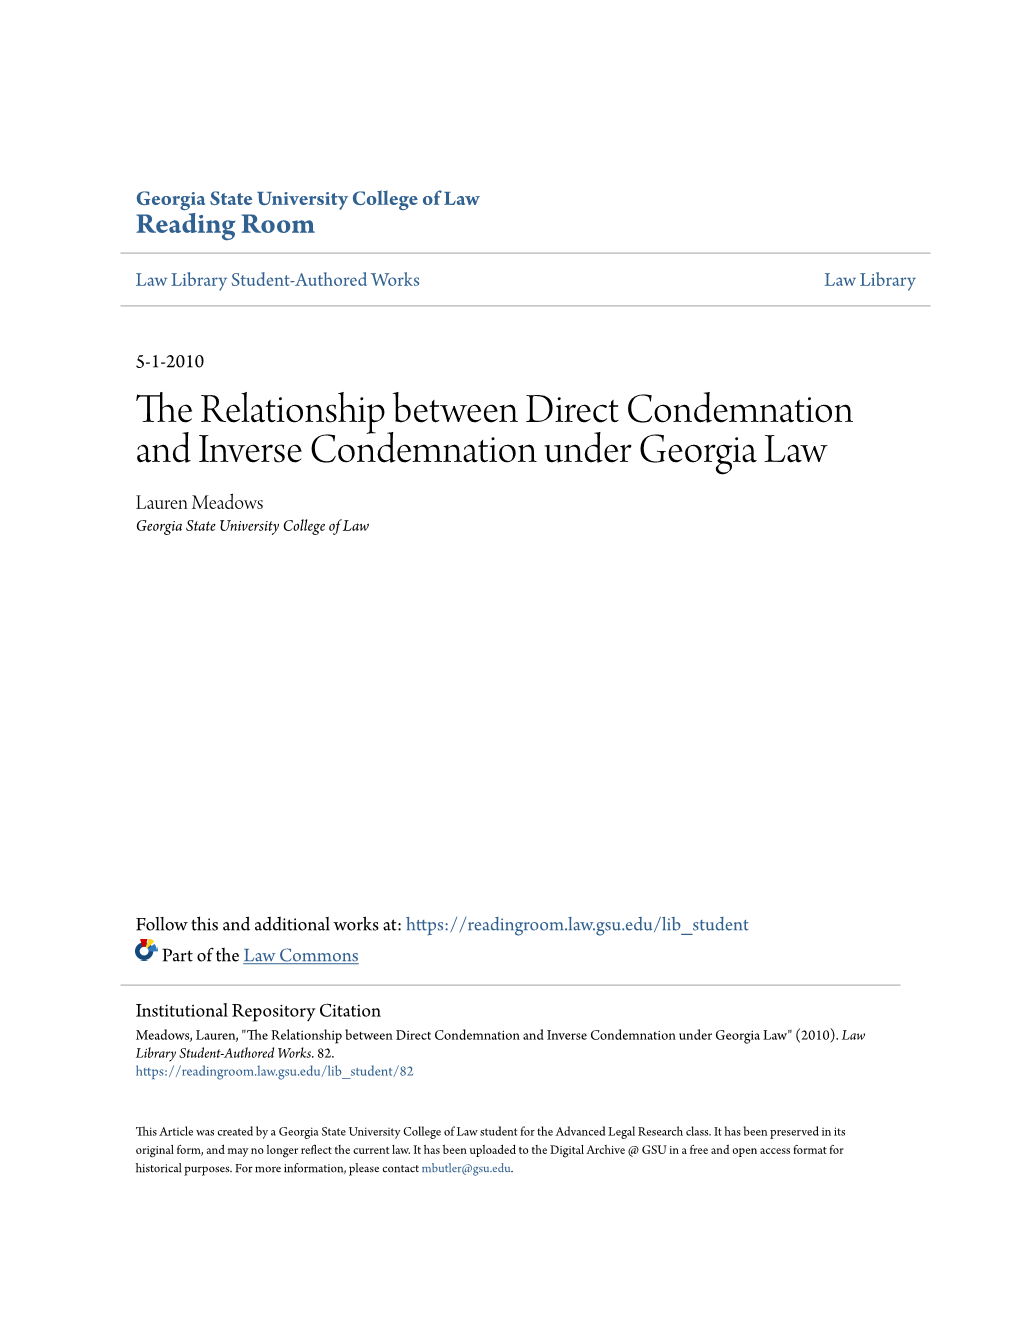 The Relationship Between Direct Condemnation and Inverse Condemnation Under Georgia Law Lauren Meadows Georgia State University College of Law